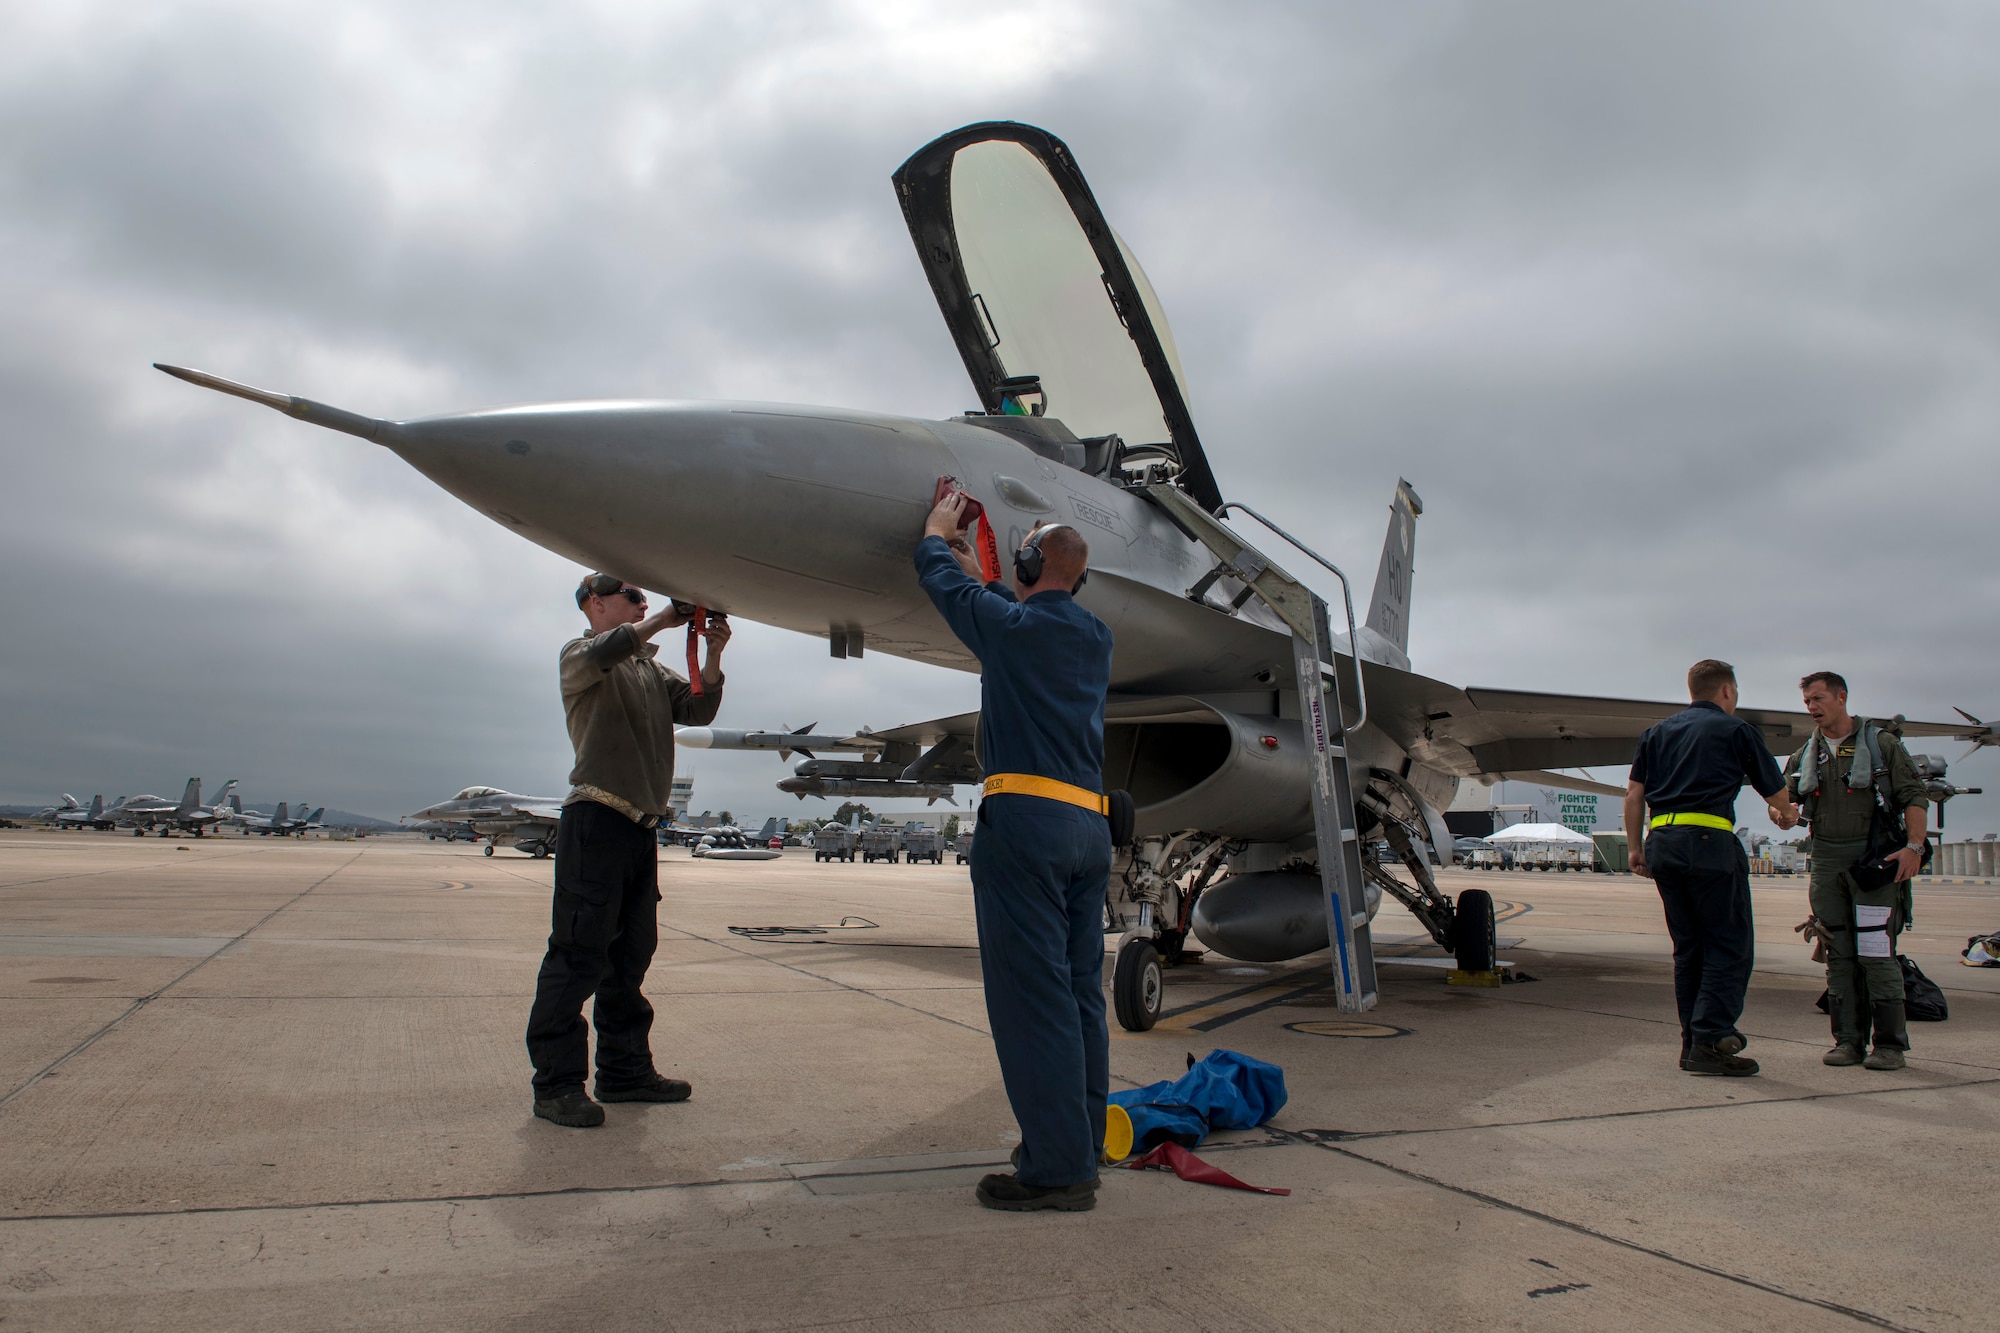 Airmen from the 314th Aircraft Maintenance Unit conduct post-flight maintenance on an F-16 Viper June 4, 2019, on Marine Corps Air Station Miramar, Calif. The 314th Fighter Squadron pilots conducted dissimiliar combat air training alongside F/A-18 Hornets from the Marine Fighter Attack Squadron 314. (U.S. Air Force photo by Staff Sgt. Christine Groening)